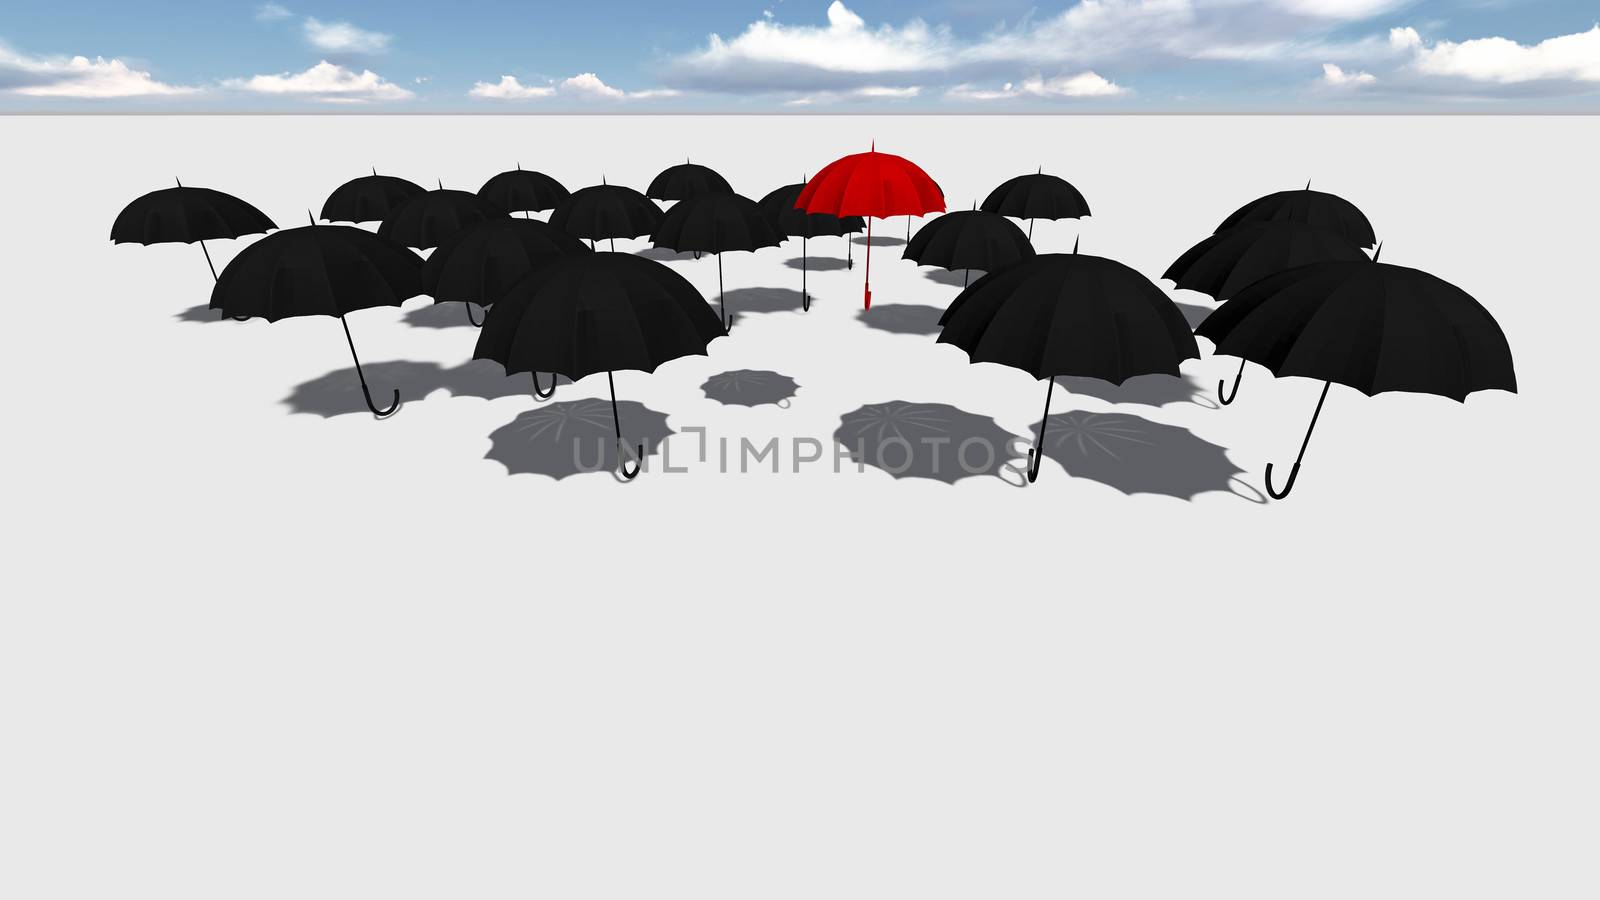 red umbrella Standing Out From The Crowd made in 3d software